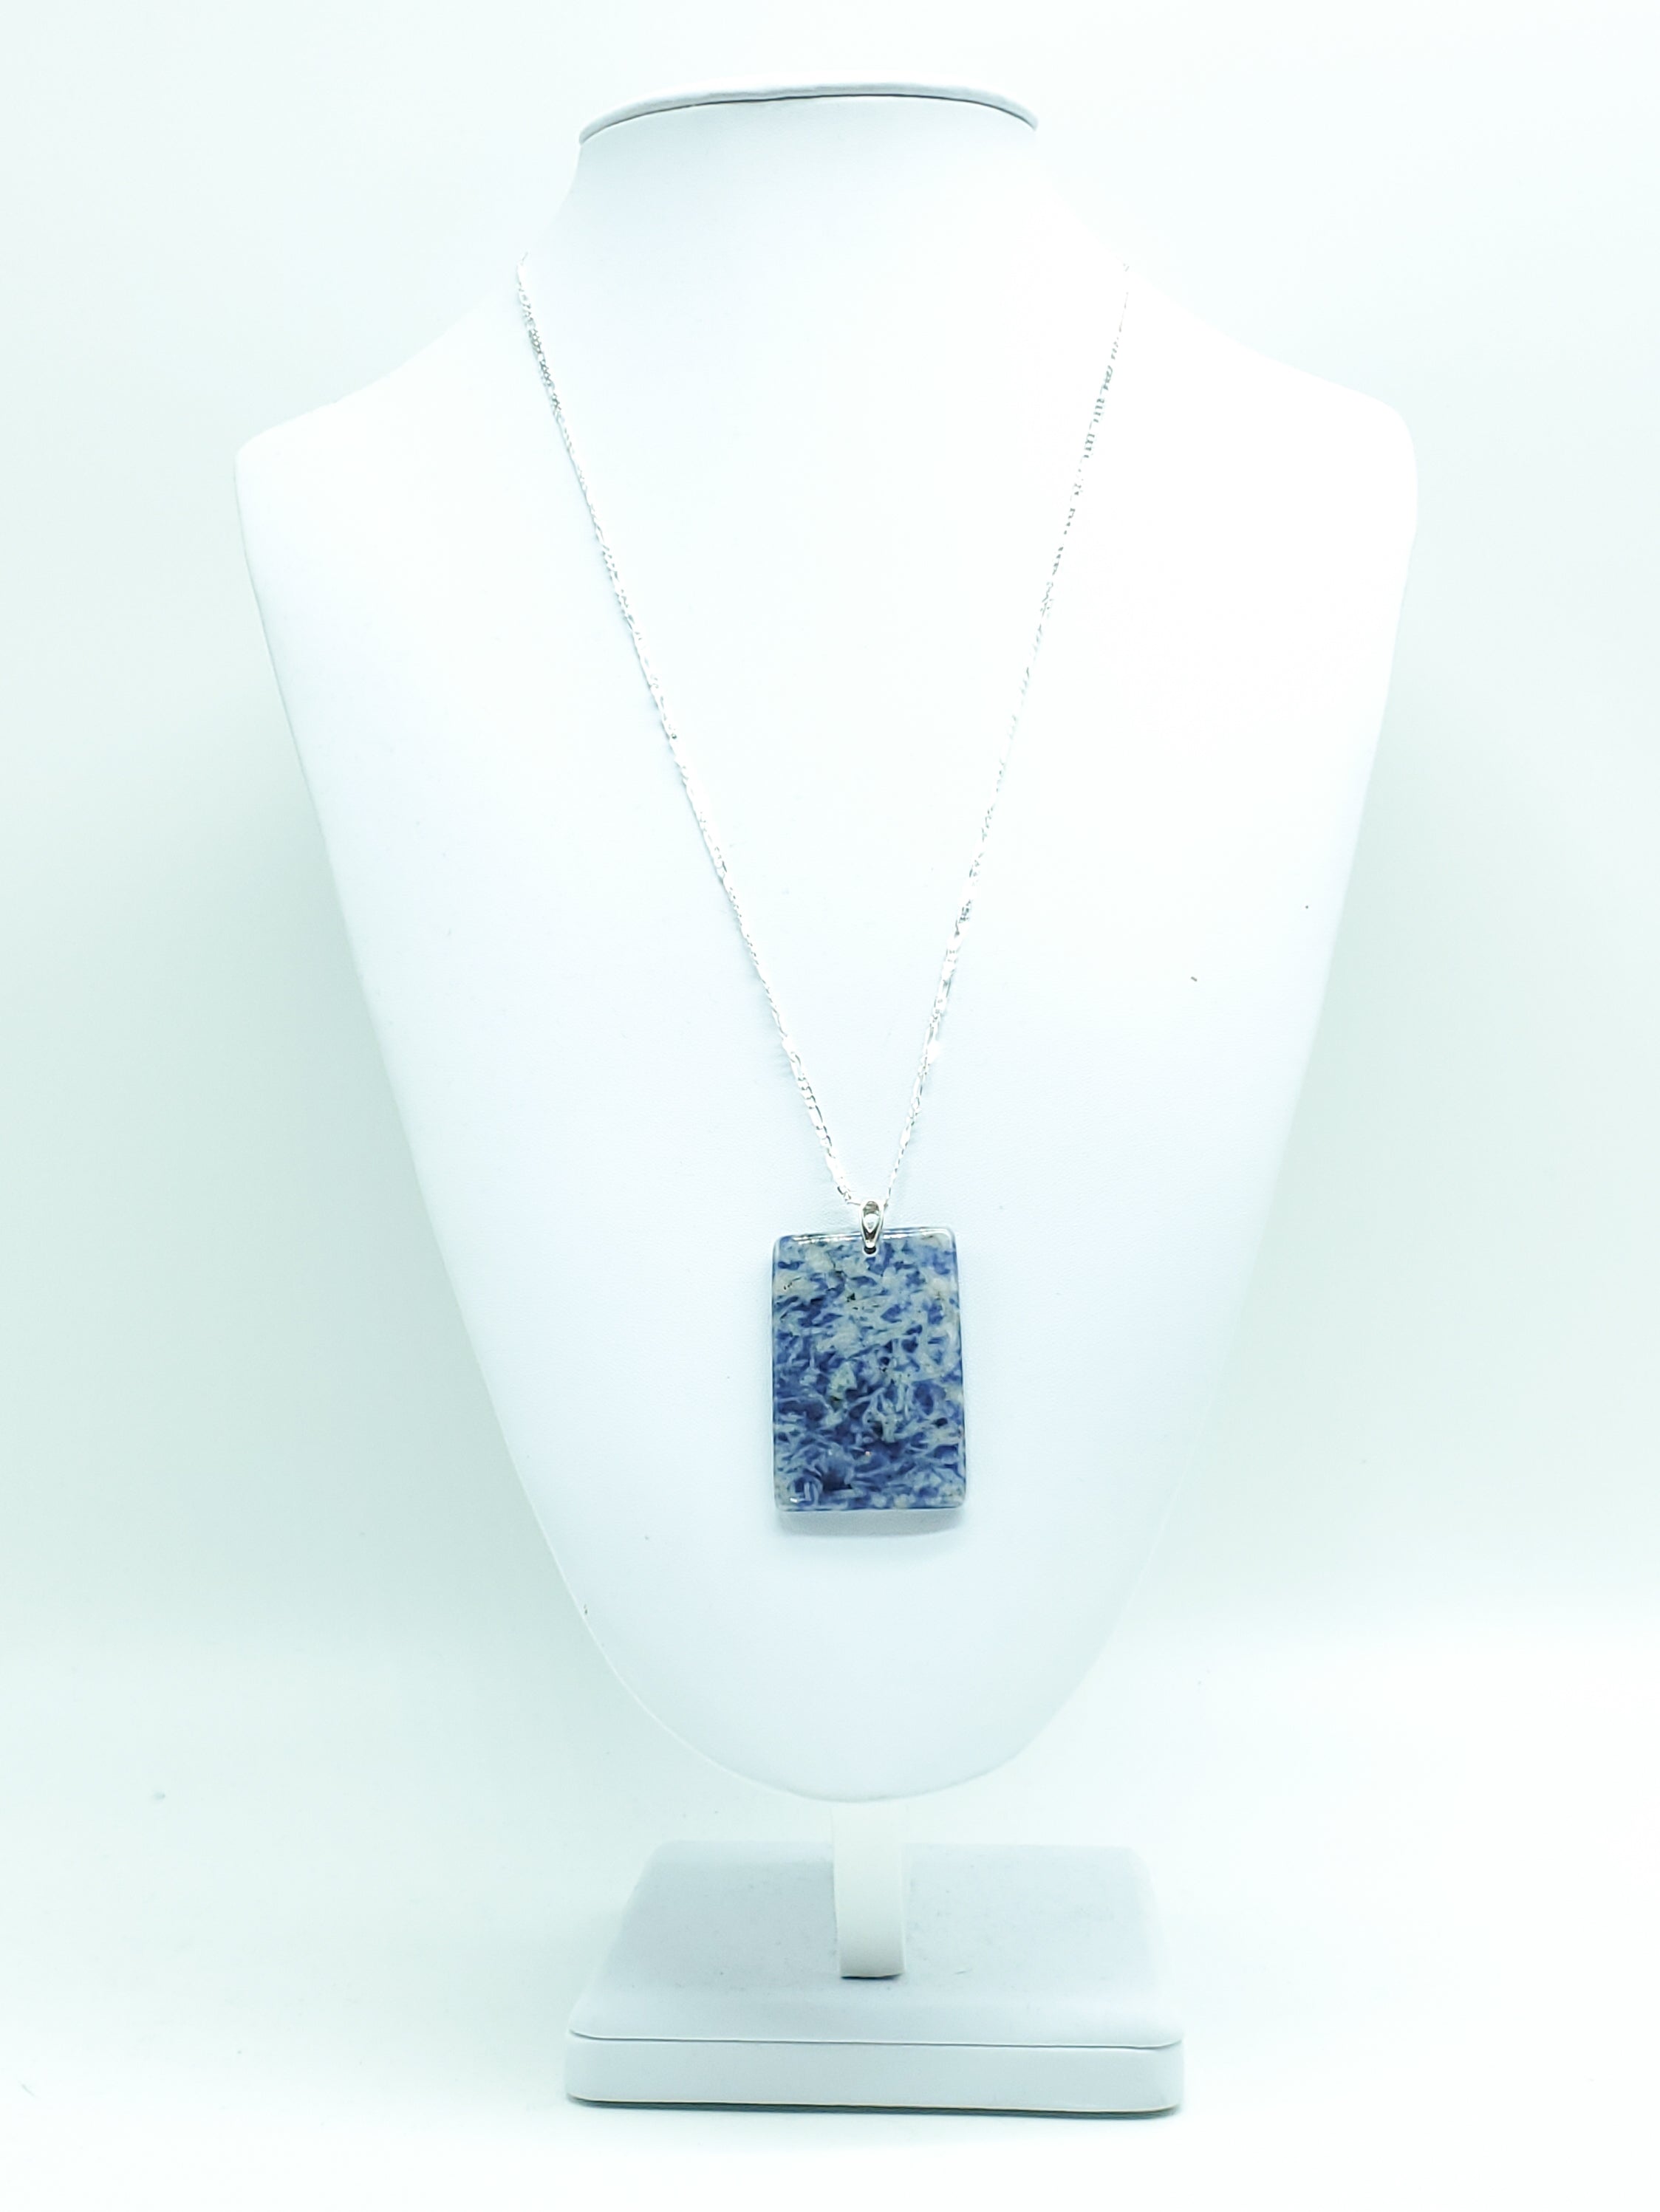 Rectangular Sodalite Pendant on Sterling Silver Bail and Figaro Chain - The Caffeinated Raven